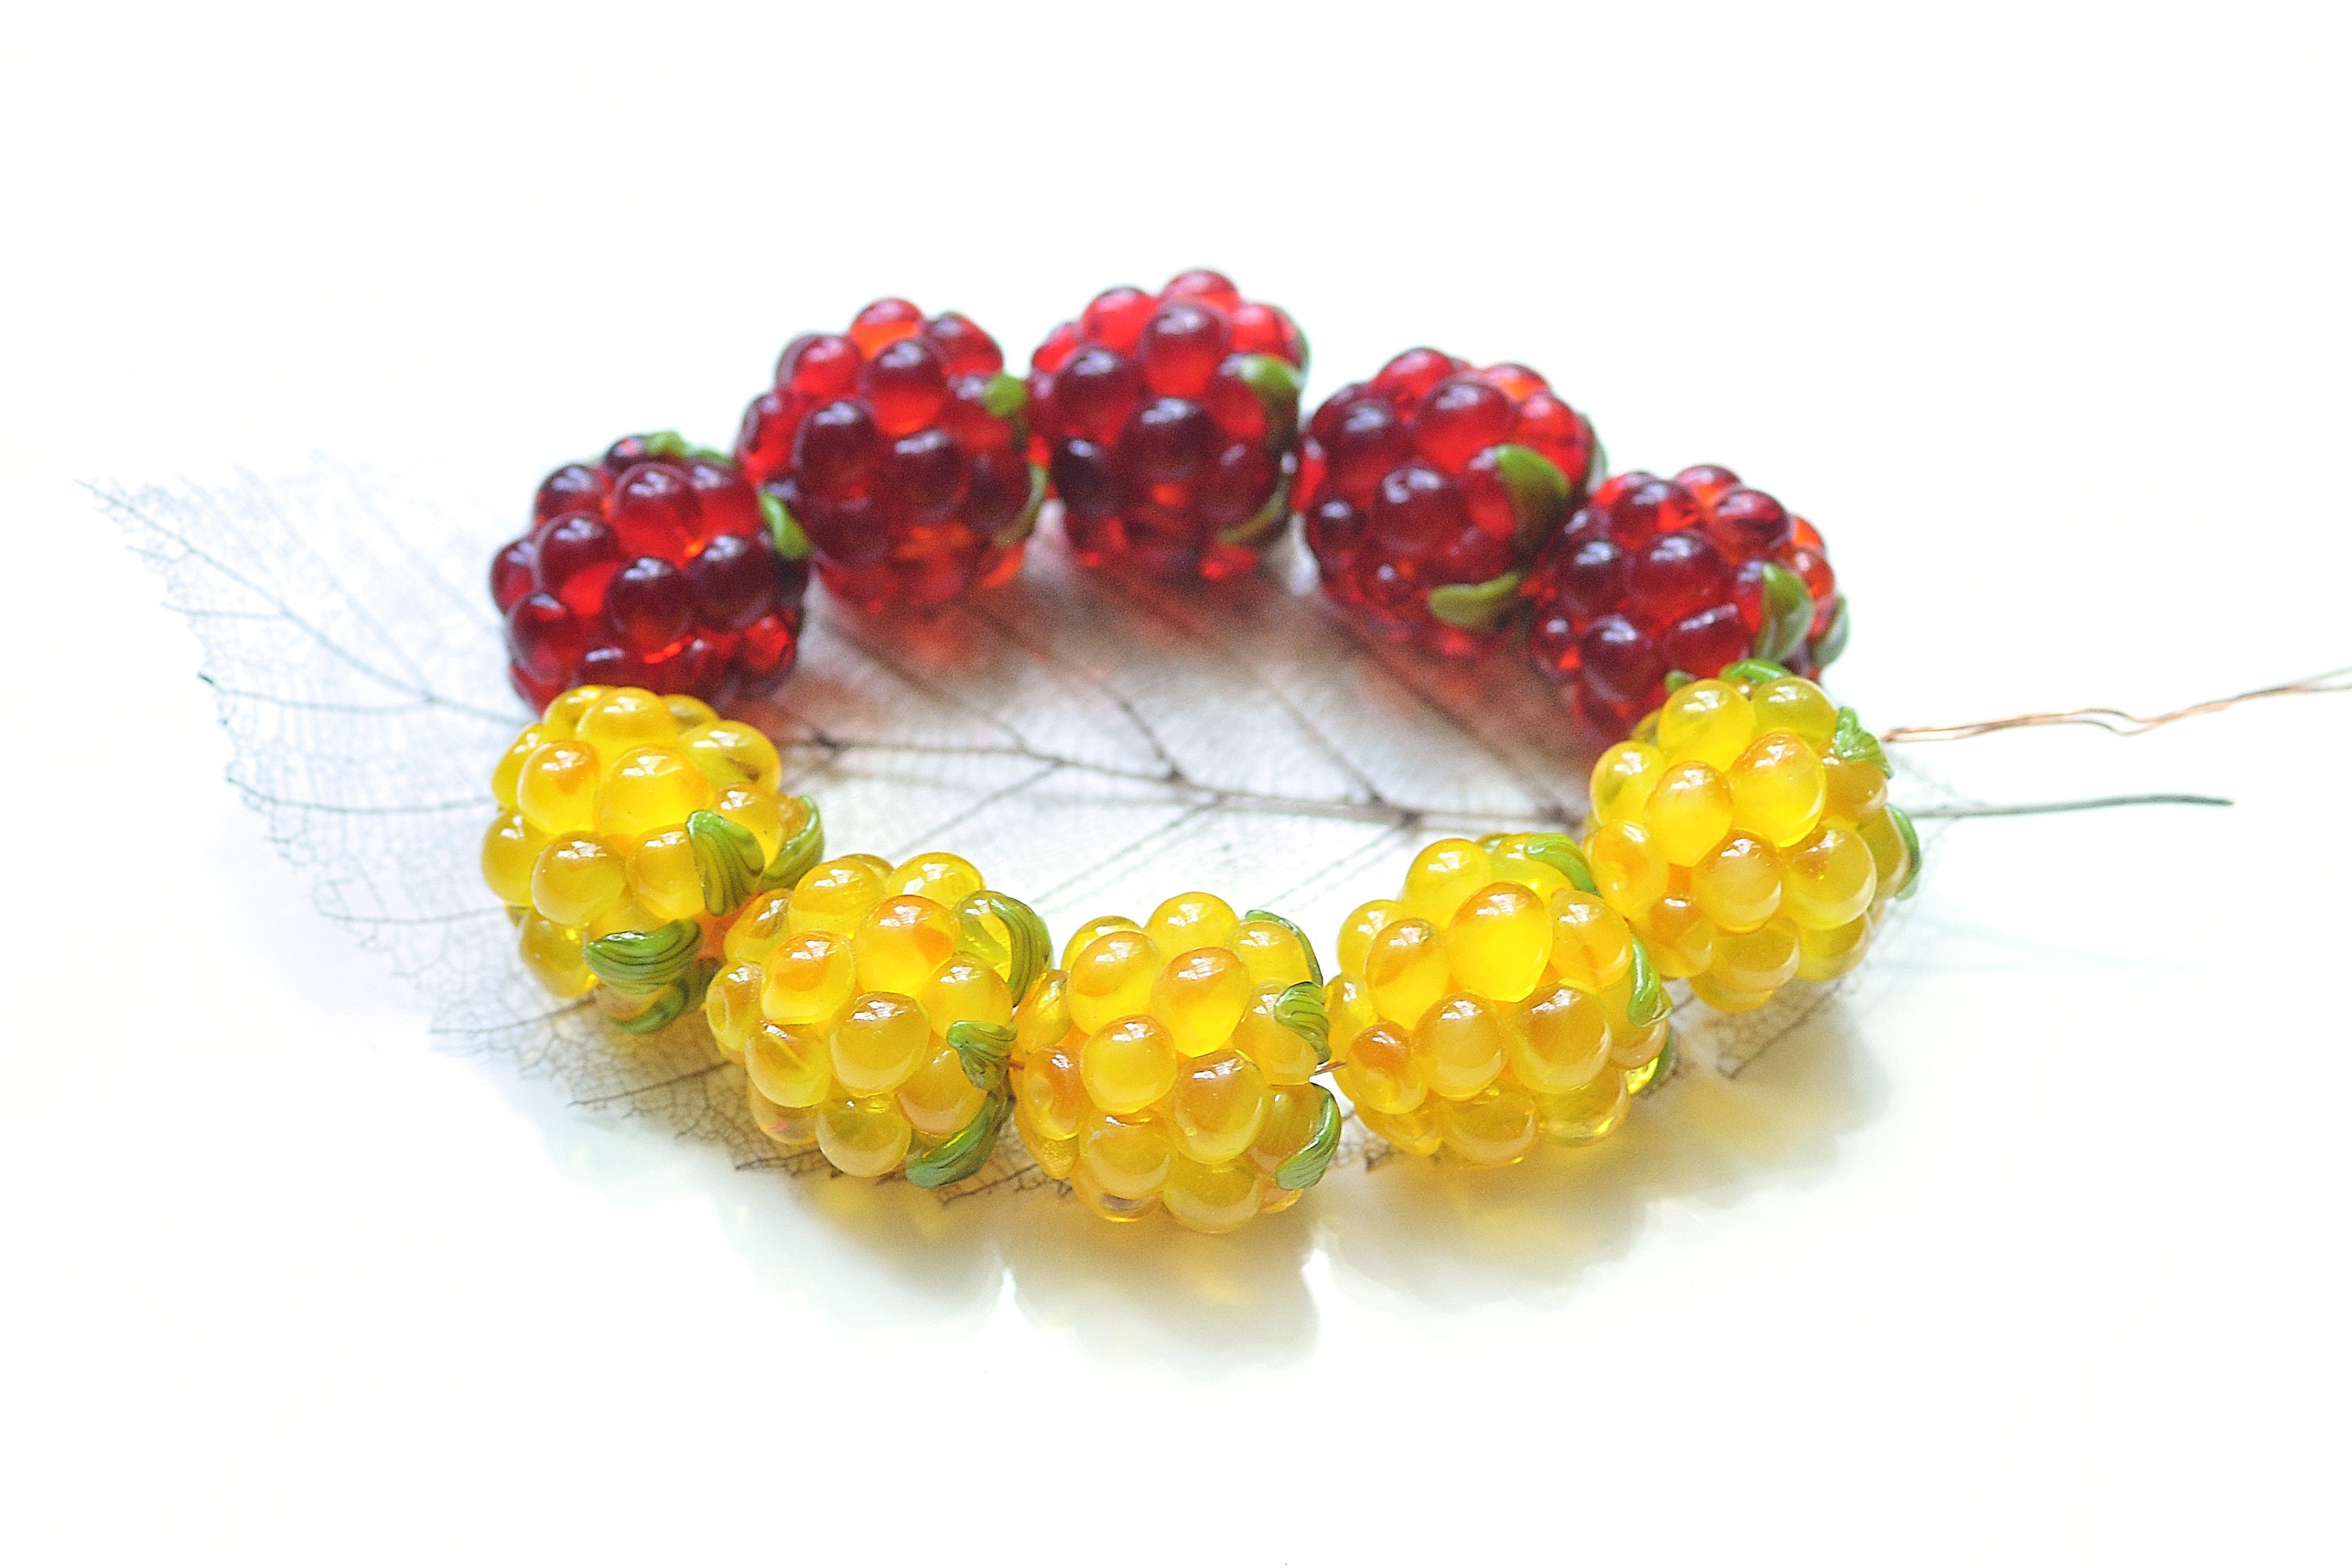  Crafans 60Pcs Fruit Lampwork Beads 10 Style Handmade Lampwork  Glass Beads Vegetables Food Apple Strawberry Cherry Bumpy Grape Charms for  Jewelry Making